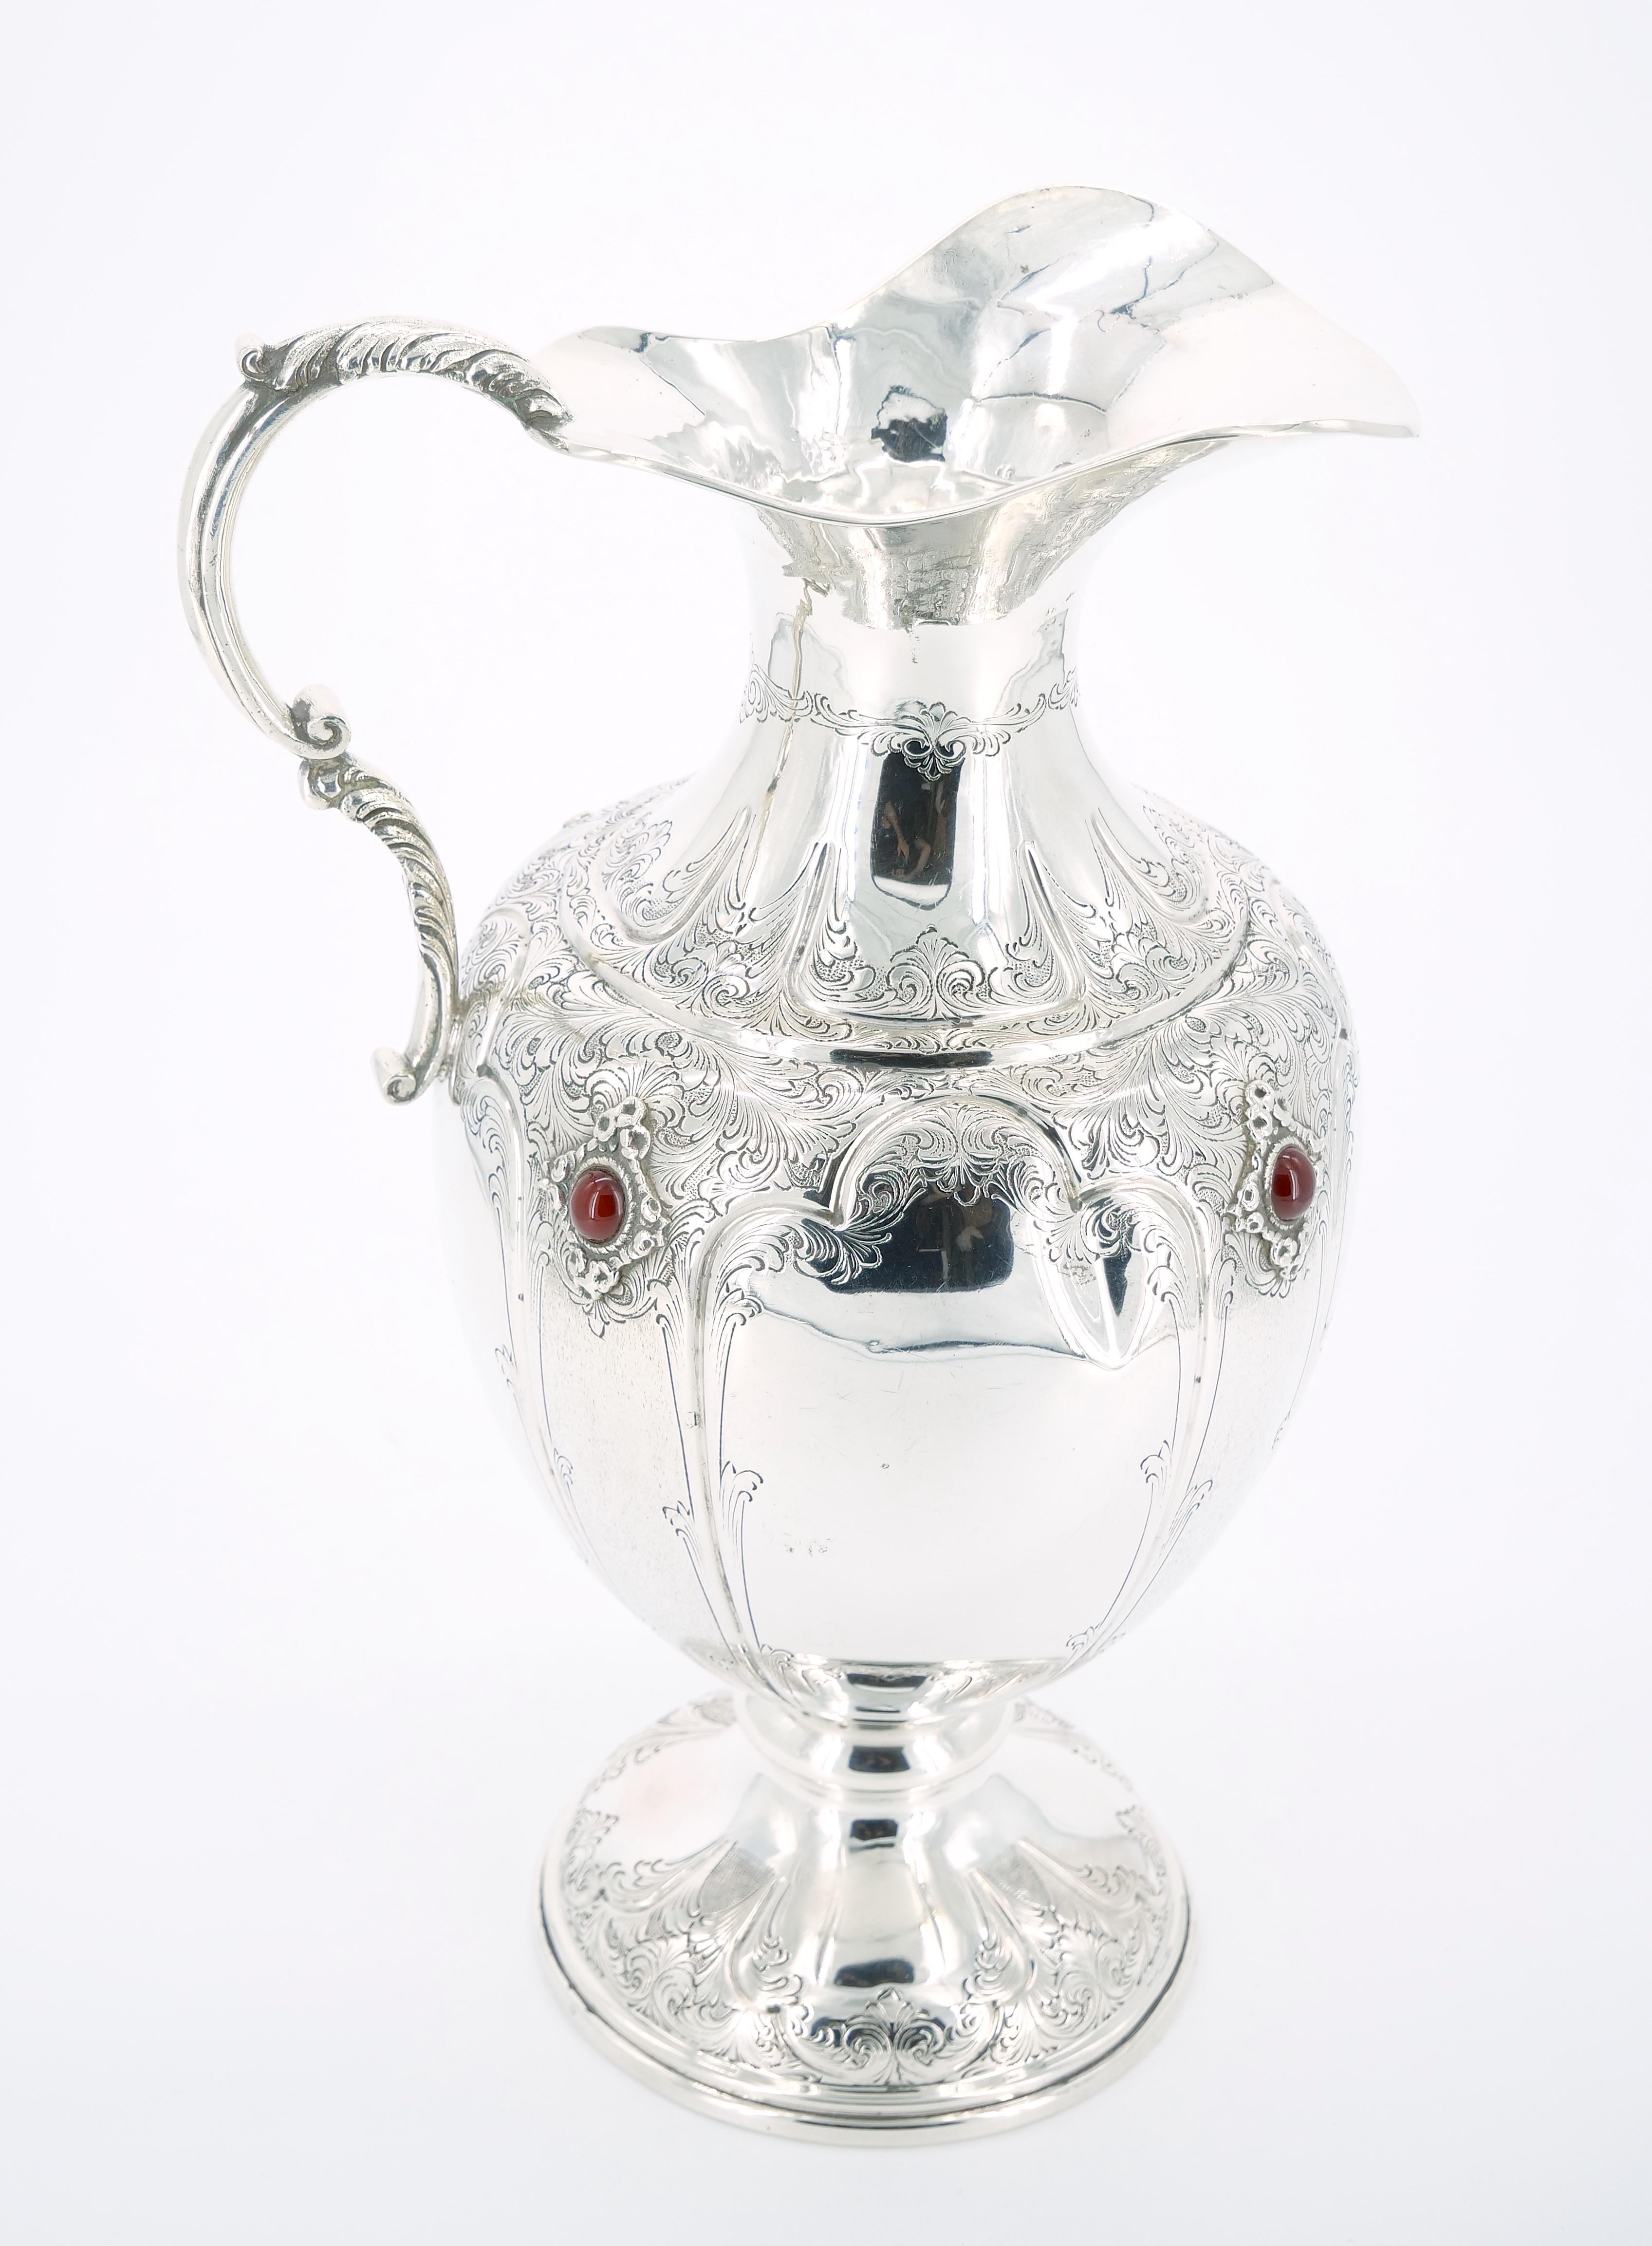 Introducing a captivating Italian 19th-century Sterling Silver and Precious Stone One-Handled Decorative Vase, a true masterpiece of craftsmanship and artistry. This remarkable piece boasts a bottle shape with a pitcher neck form, featuring an